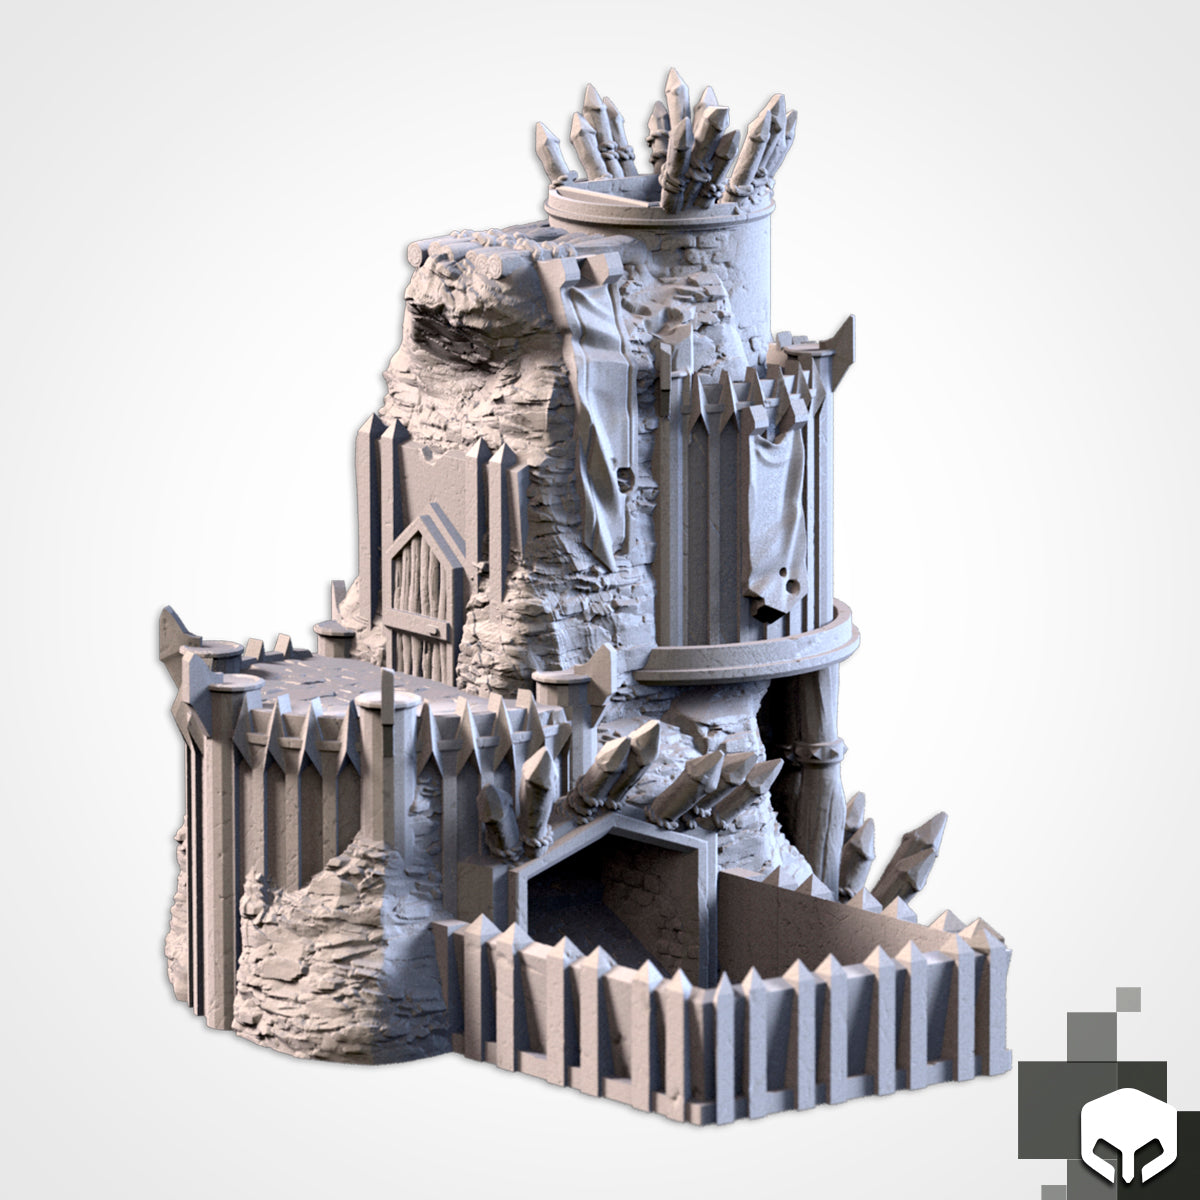 The Game of Destiny - 'Wild Bastion' Dice Tower